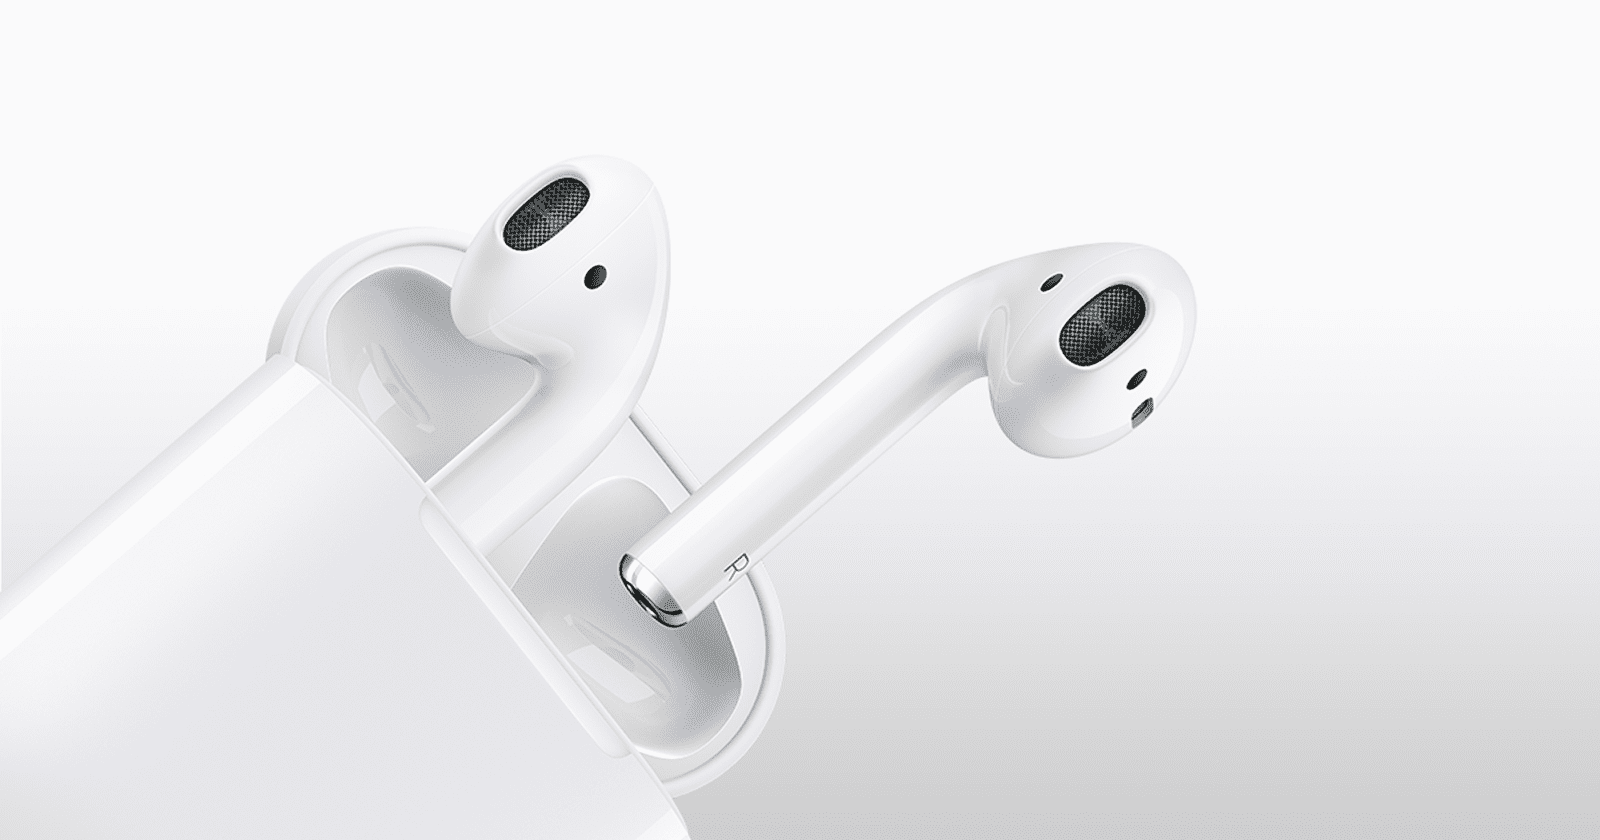 8 Ways to See the Charge Level of Your AirPods - The Mac Observer